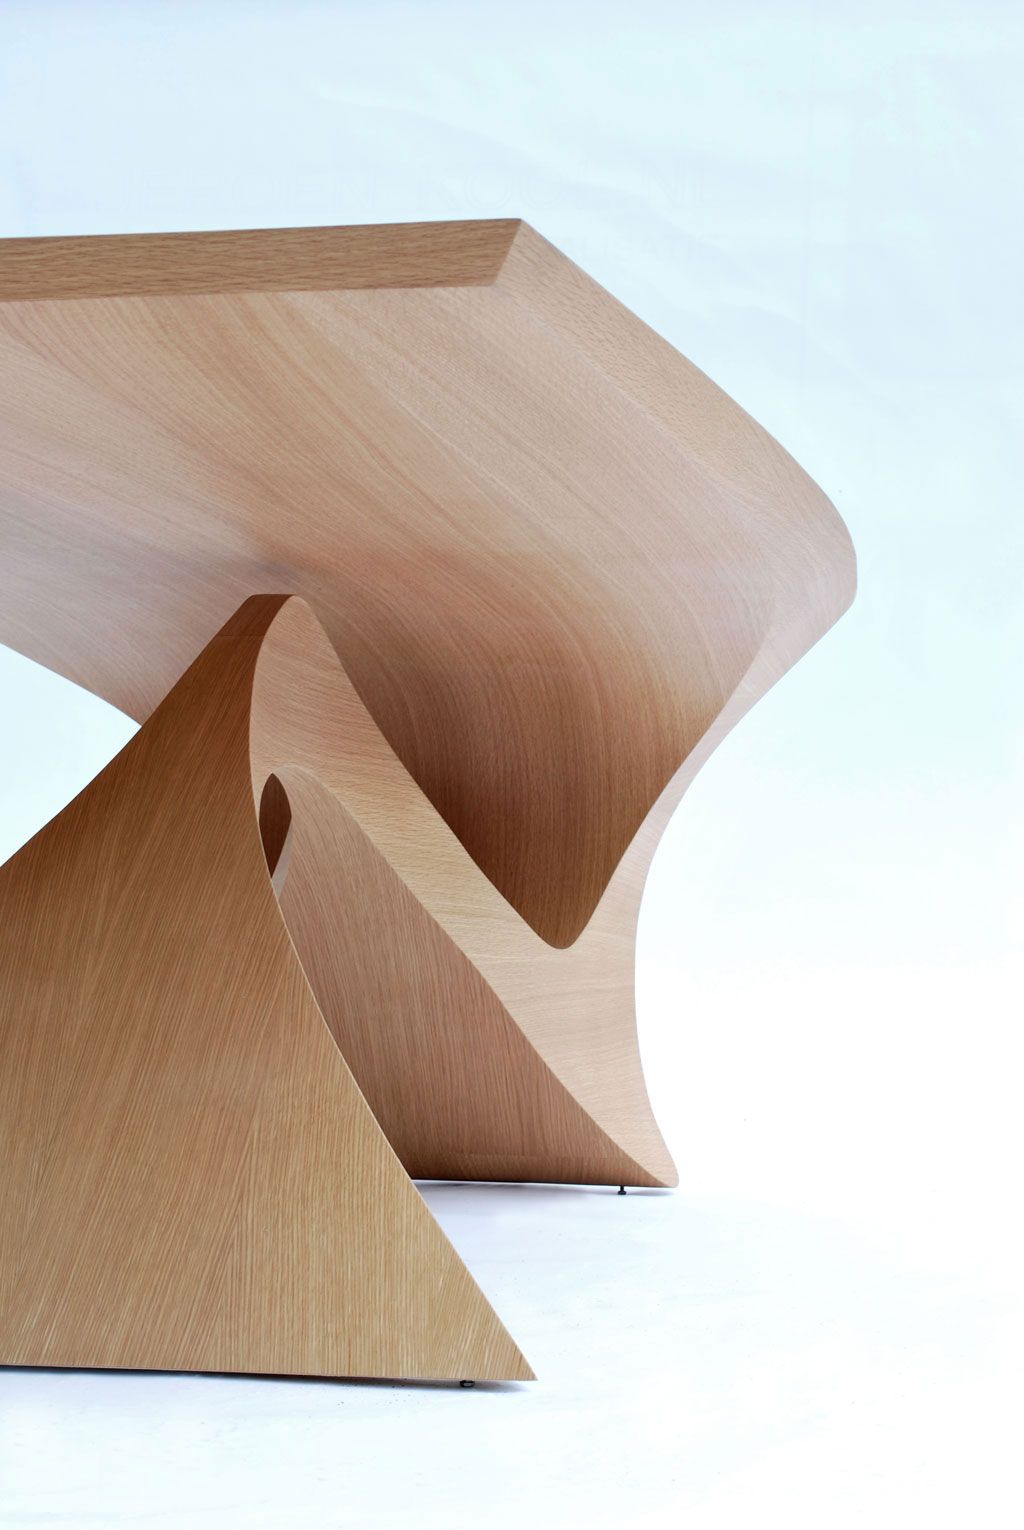 'Form Follow Function' table by Daan Mulder